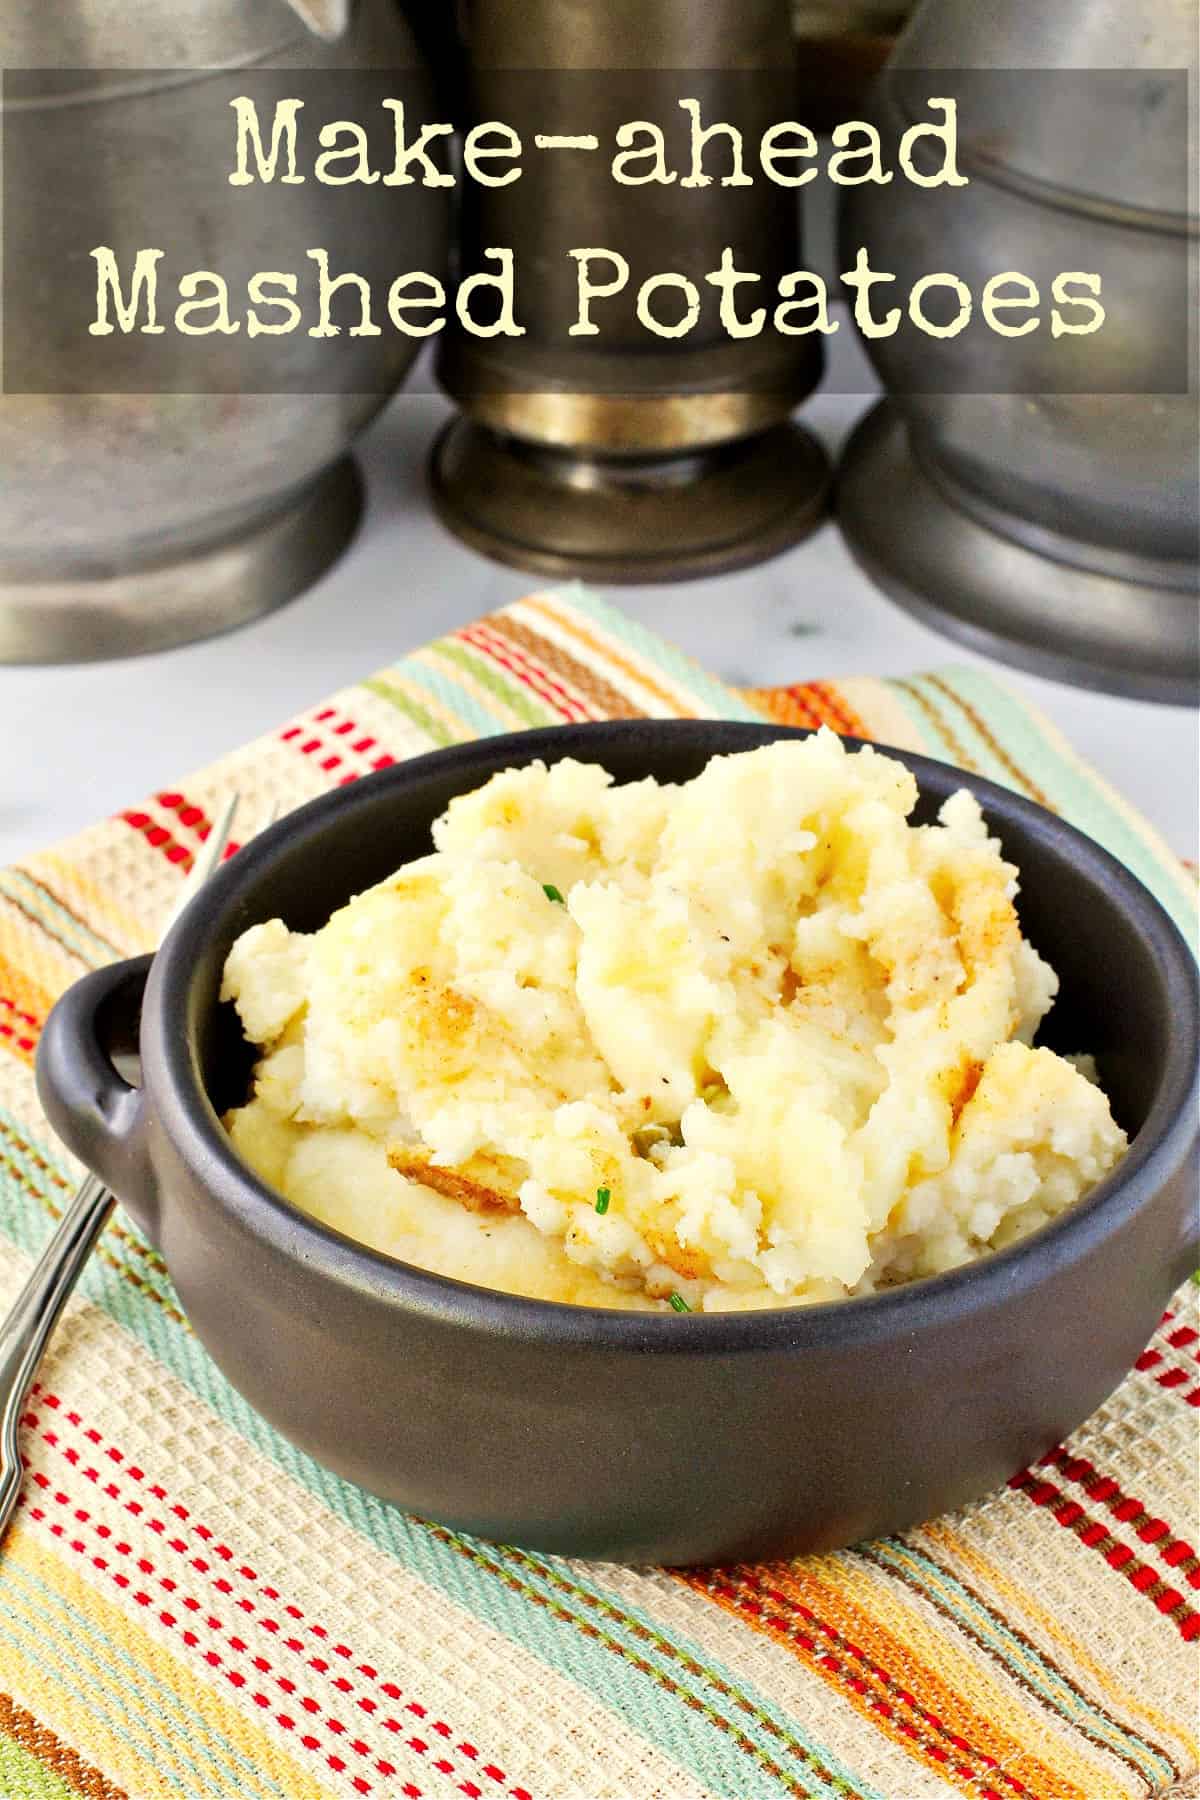 Make Ahead Mashed Potatoes in a small black bowl.